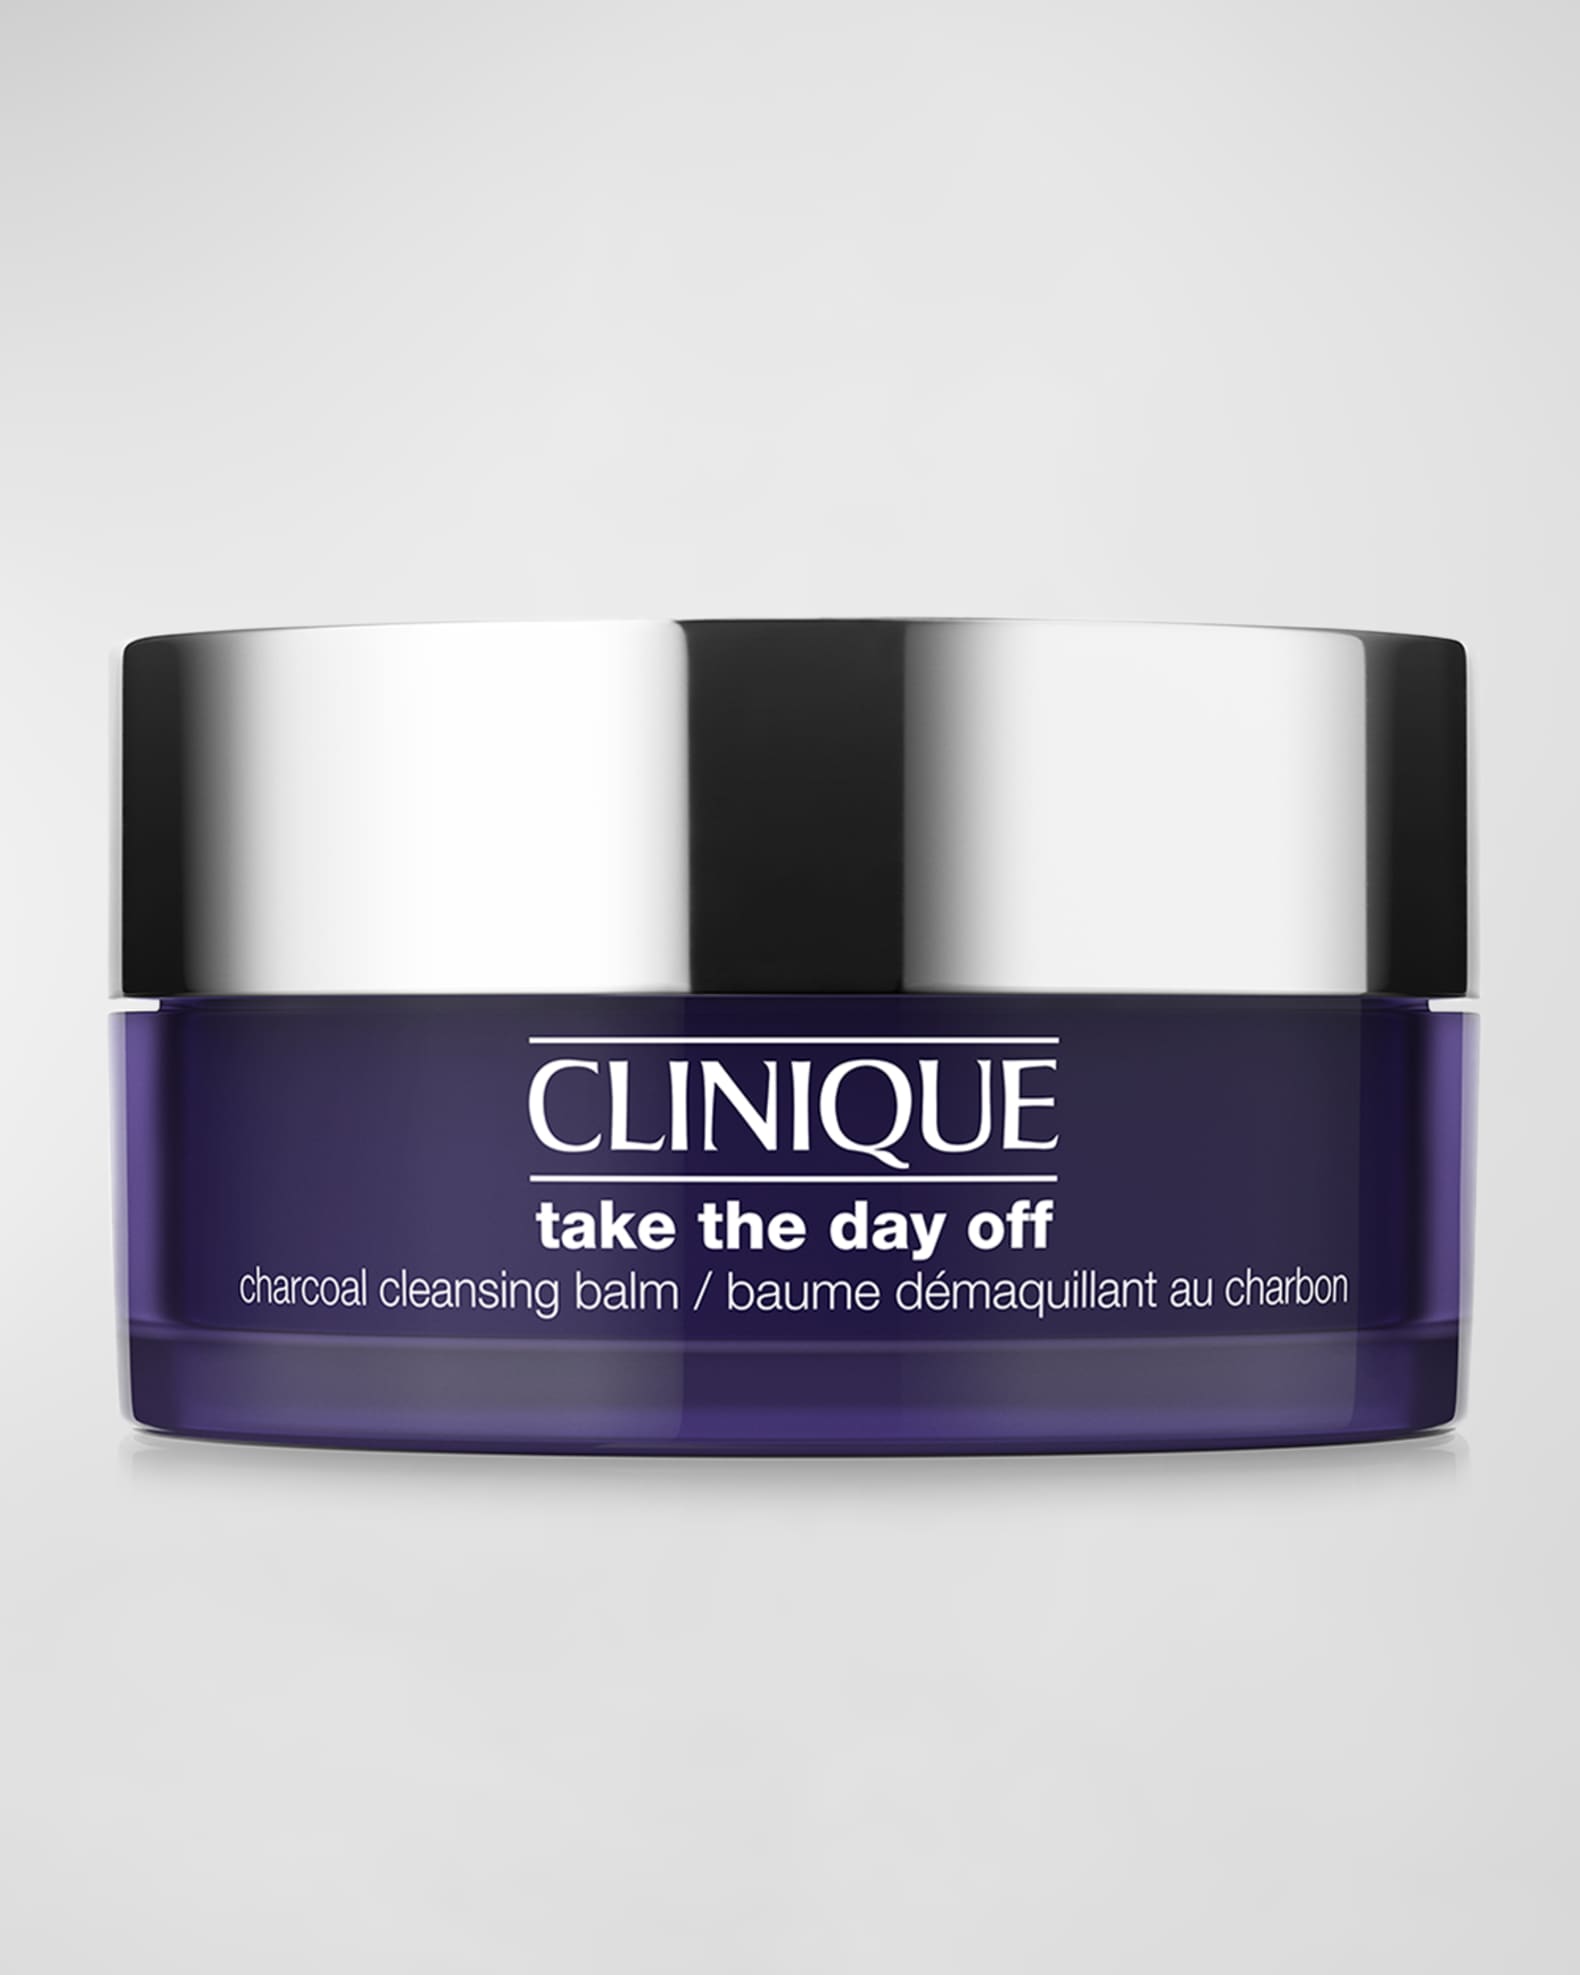 Mijnwerker cliënt volwassene Clinique Take The Day Off Charcoal Cleansing Balm Makeup Remover, 4.2 oz. |  Neiman Marcus